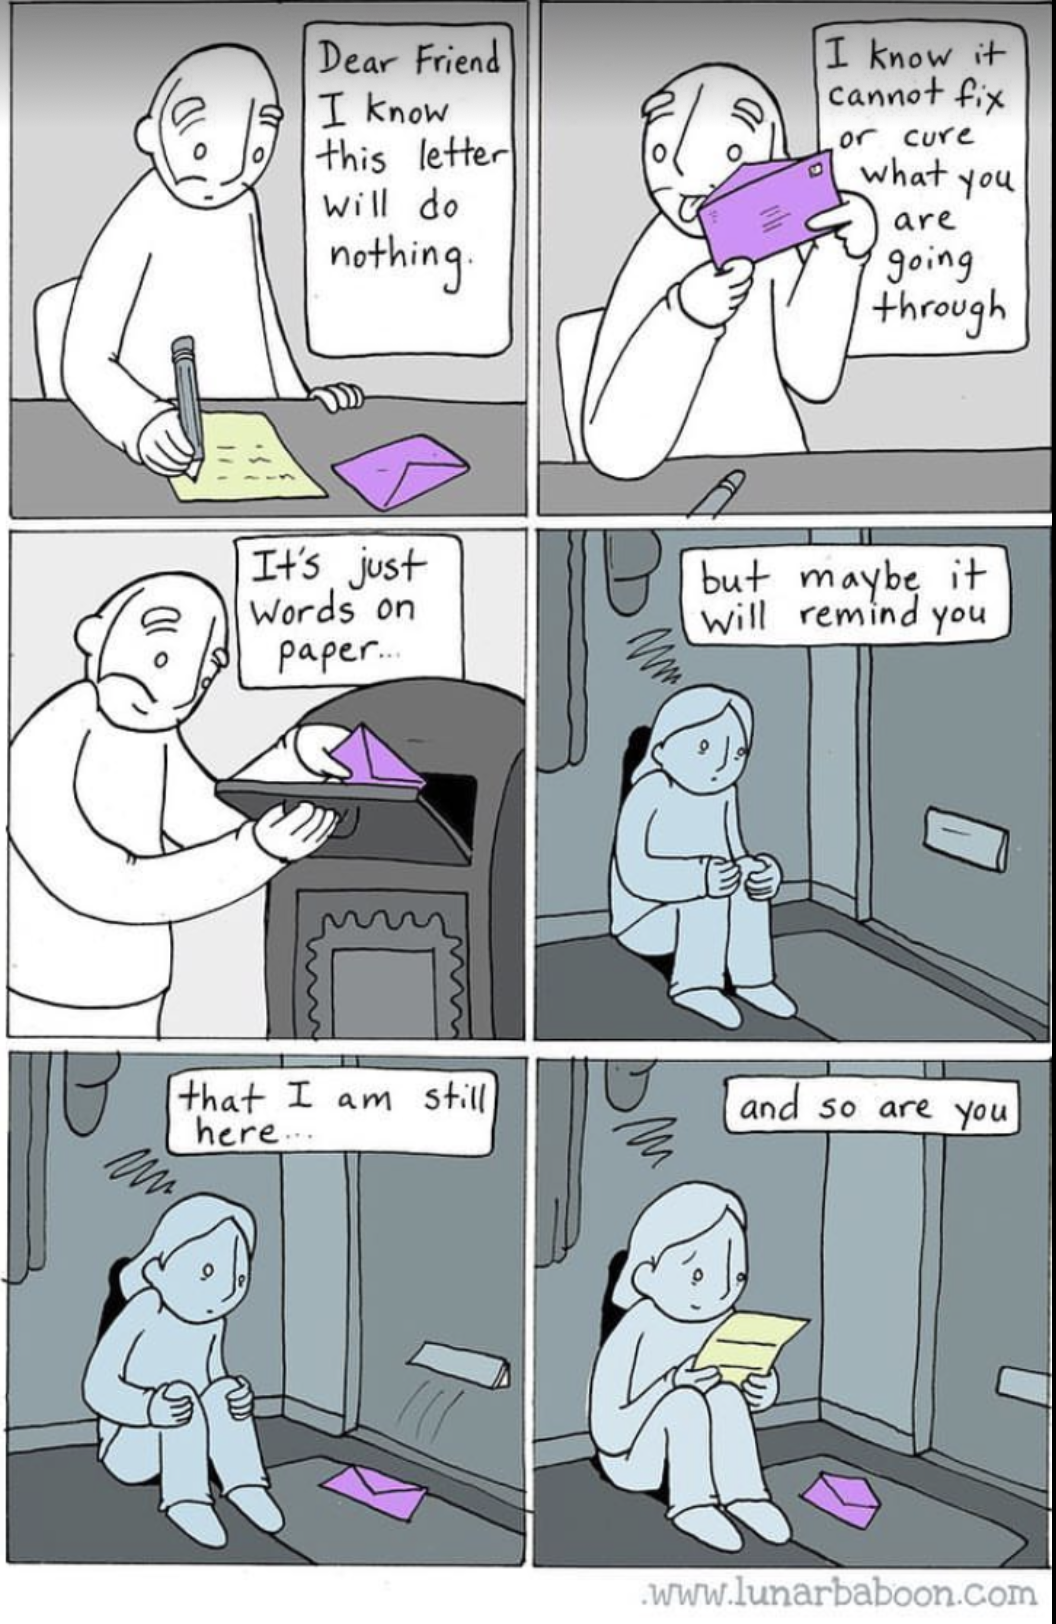 comics - Dear Friend I know this letter will do I know it cannot fix or cure what you are nothing going through It's just Words on paper but maybe it will remind you that I am still and so are you